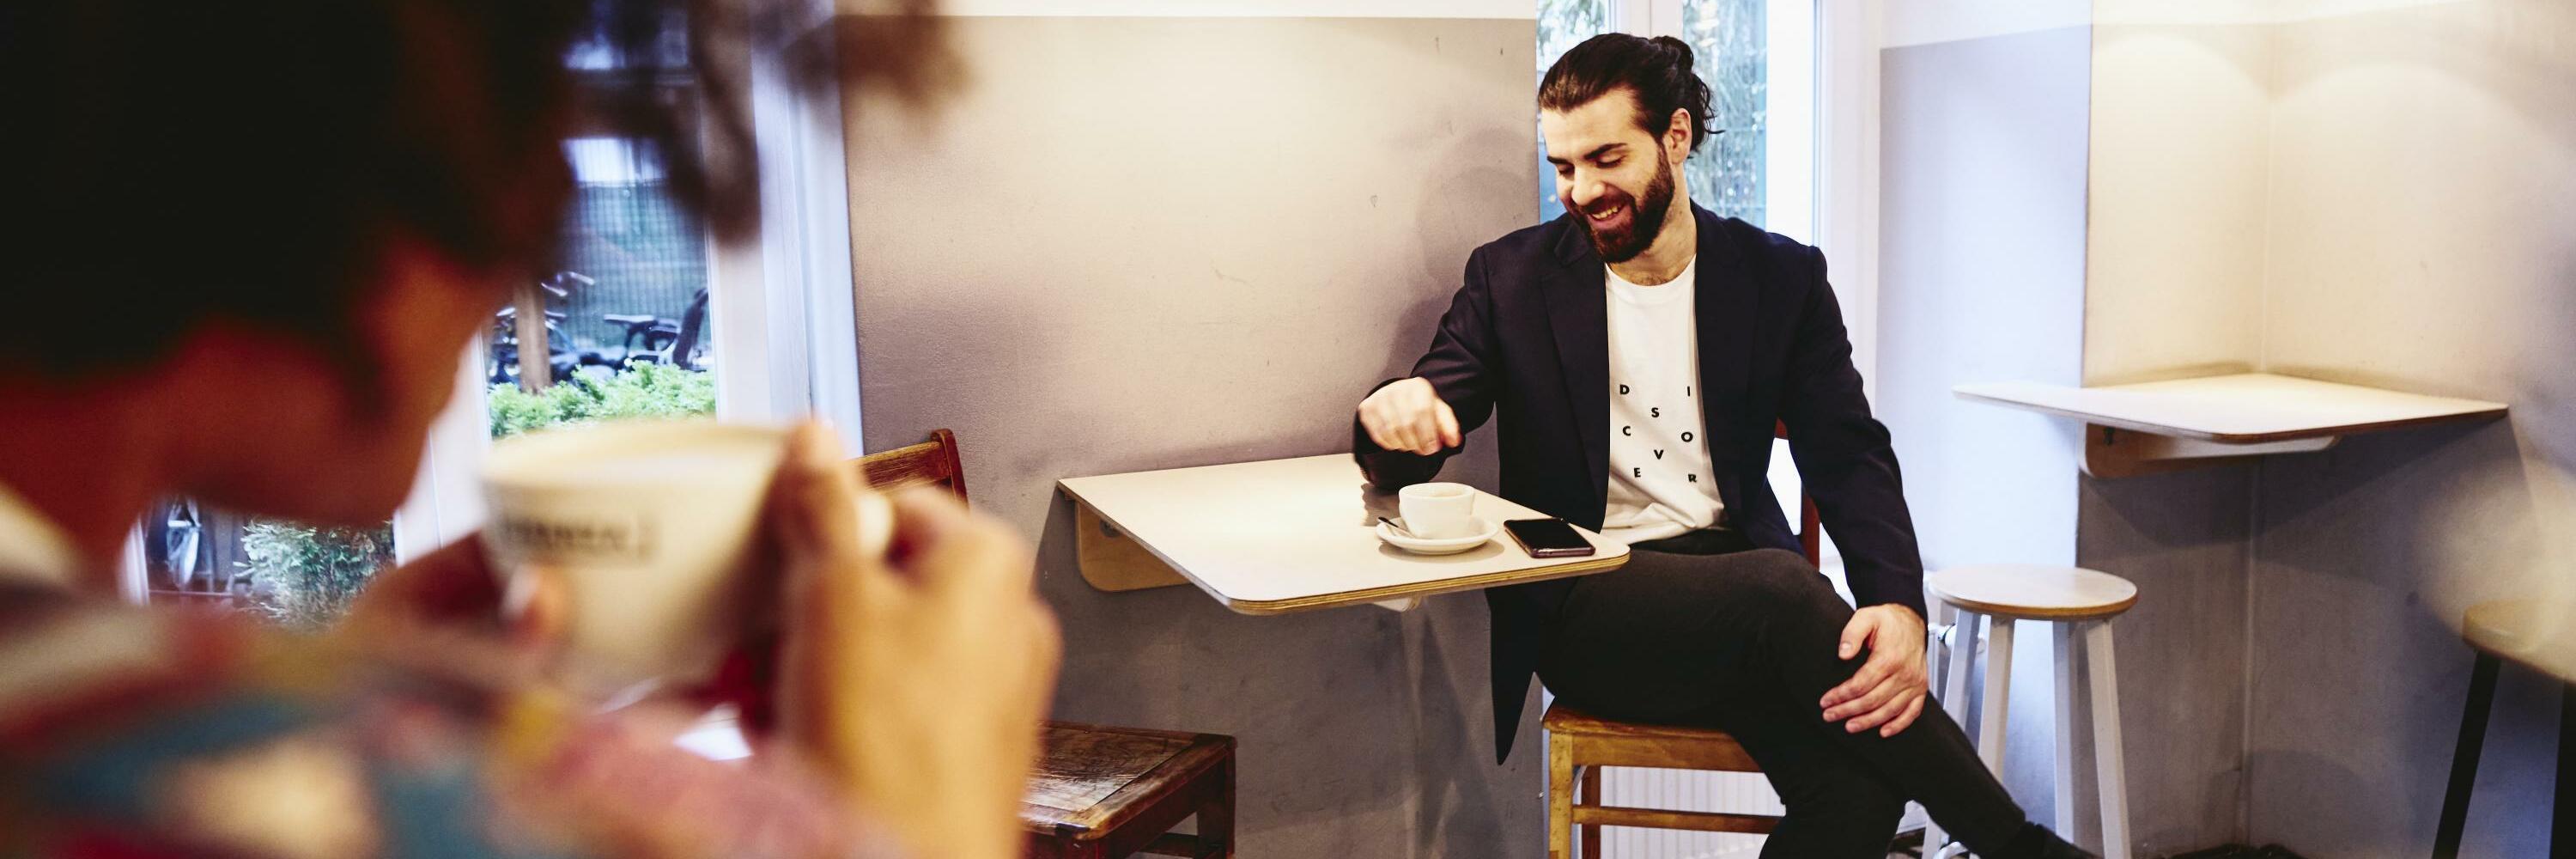 Man sitting at a table with coffee, looking down while having a conversation with someone.